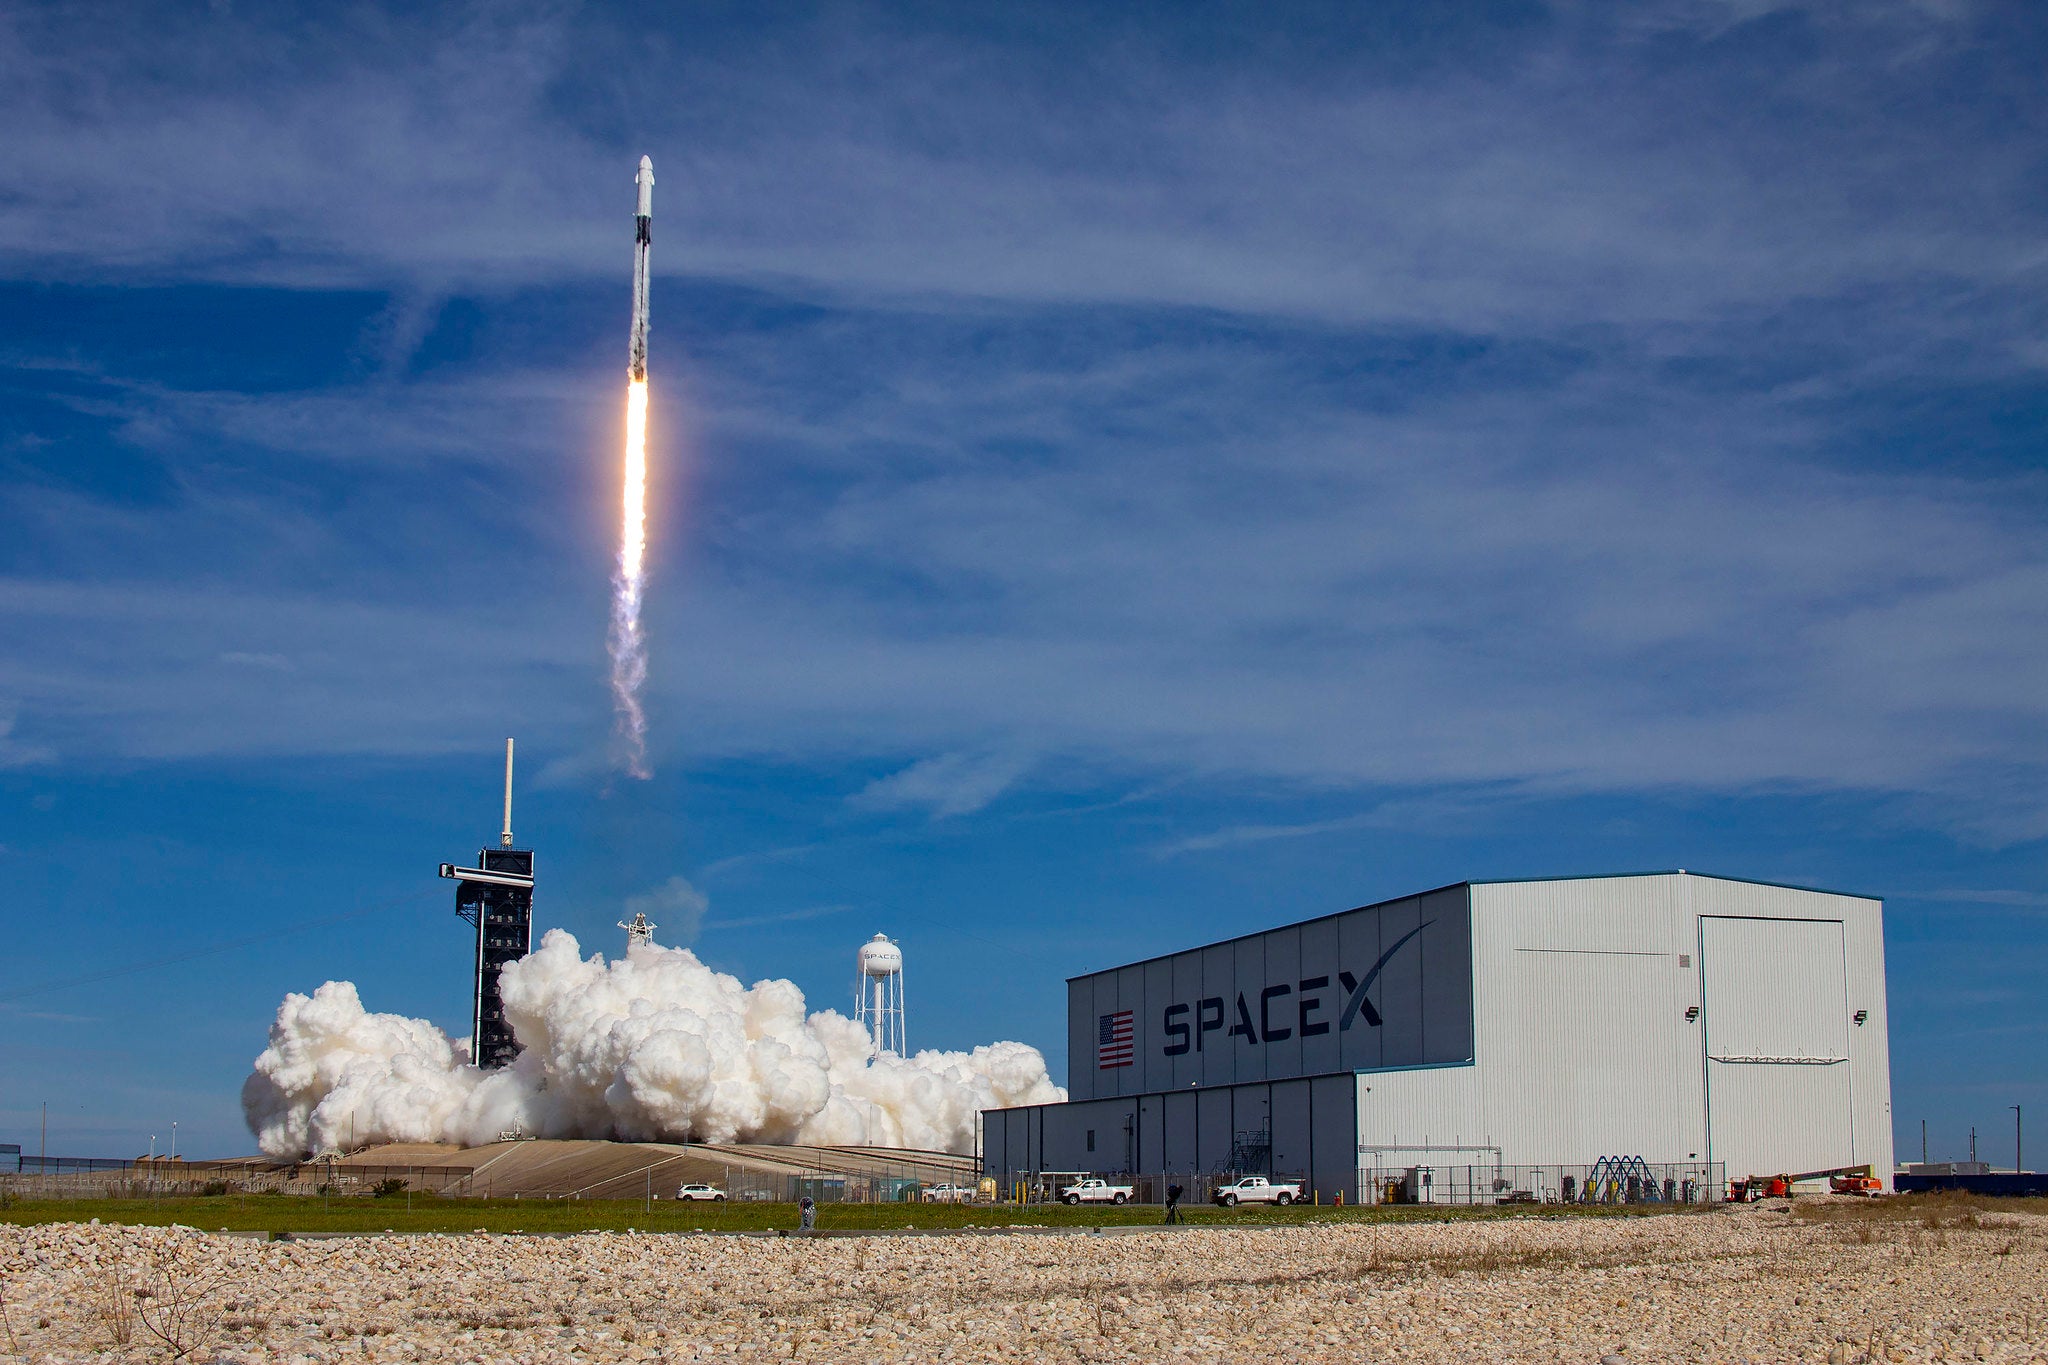 President of Indonesia invites SpaceX to assess the country as a potential launch site